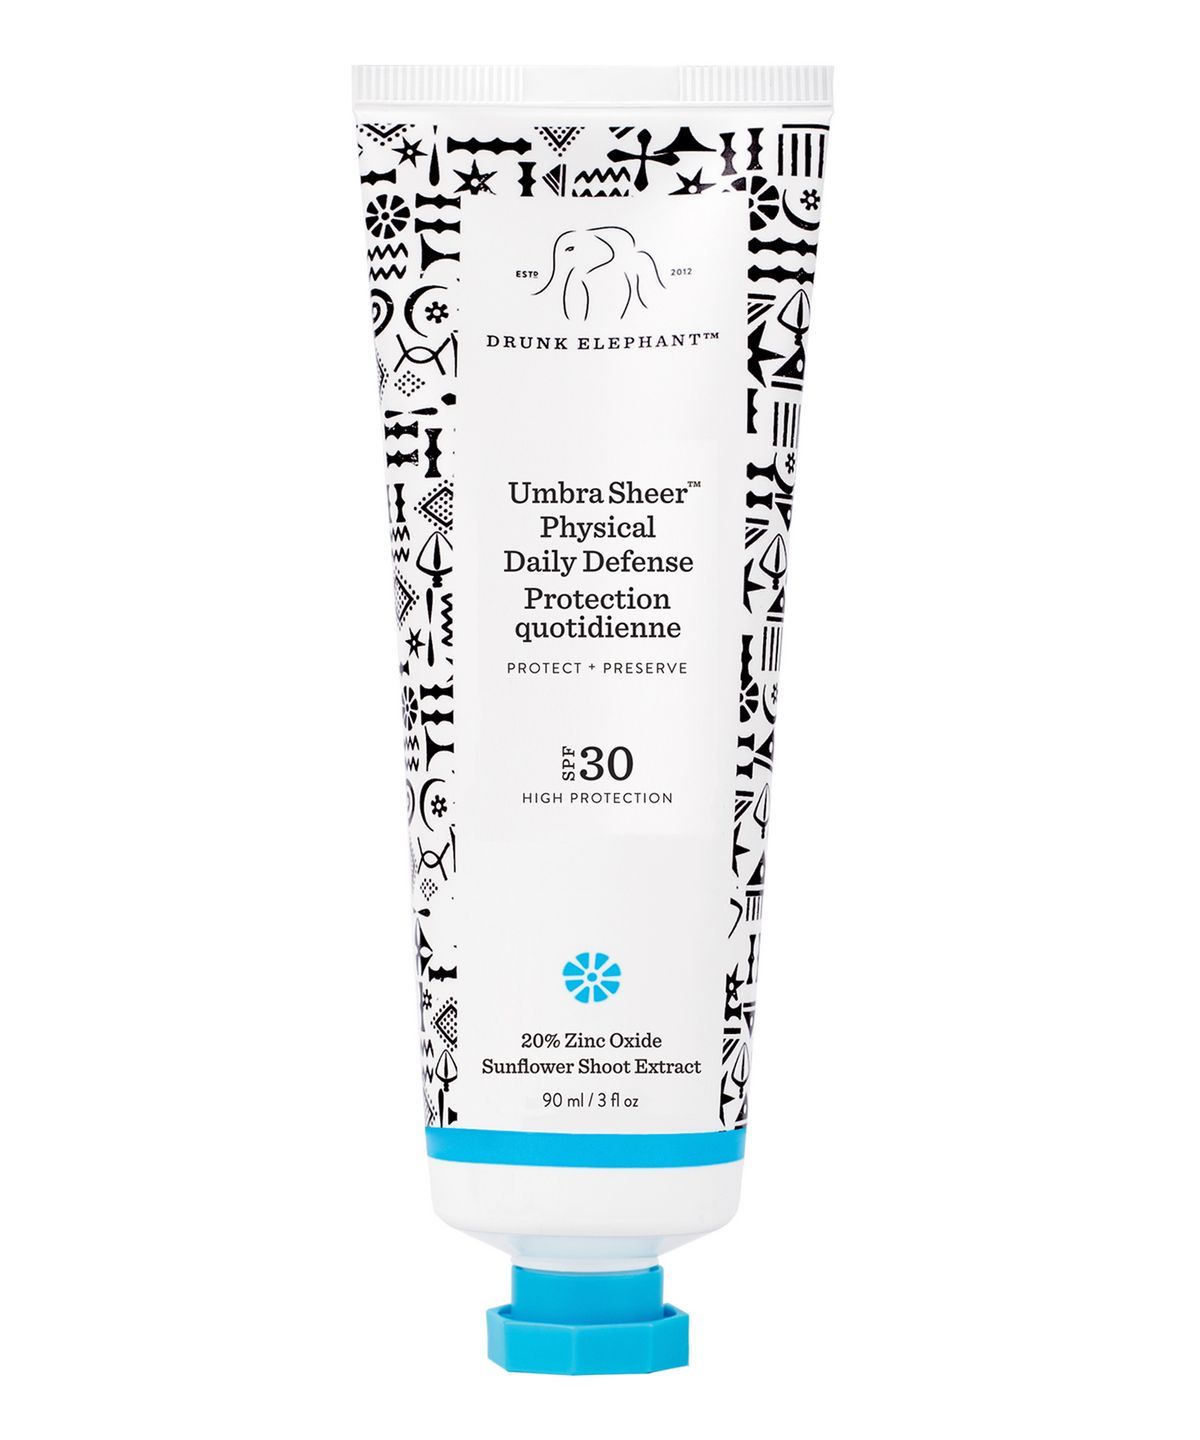 Umbra Sheer Physical Daily Defence SPF 30 by Drunk Elephant in UAE